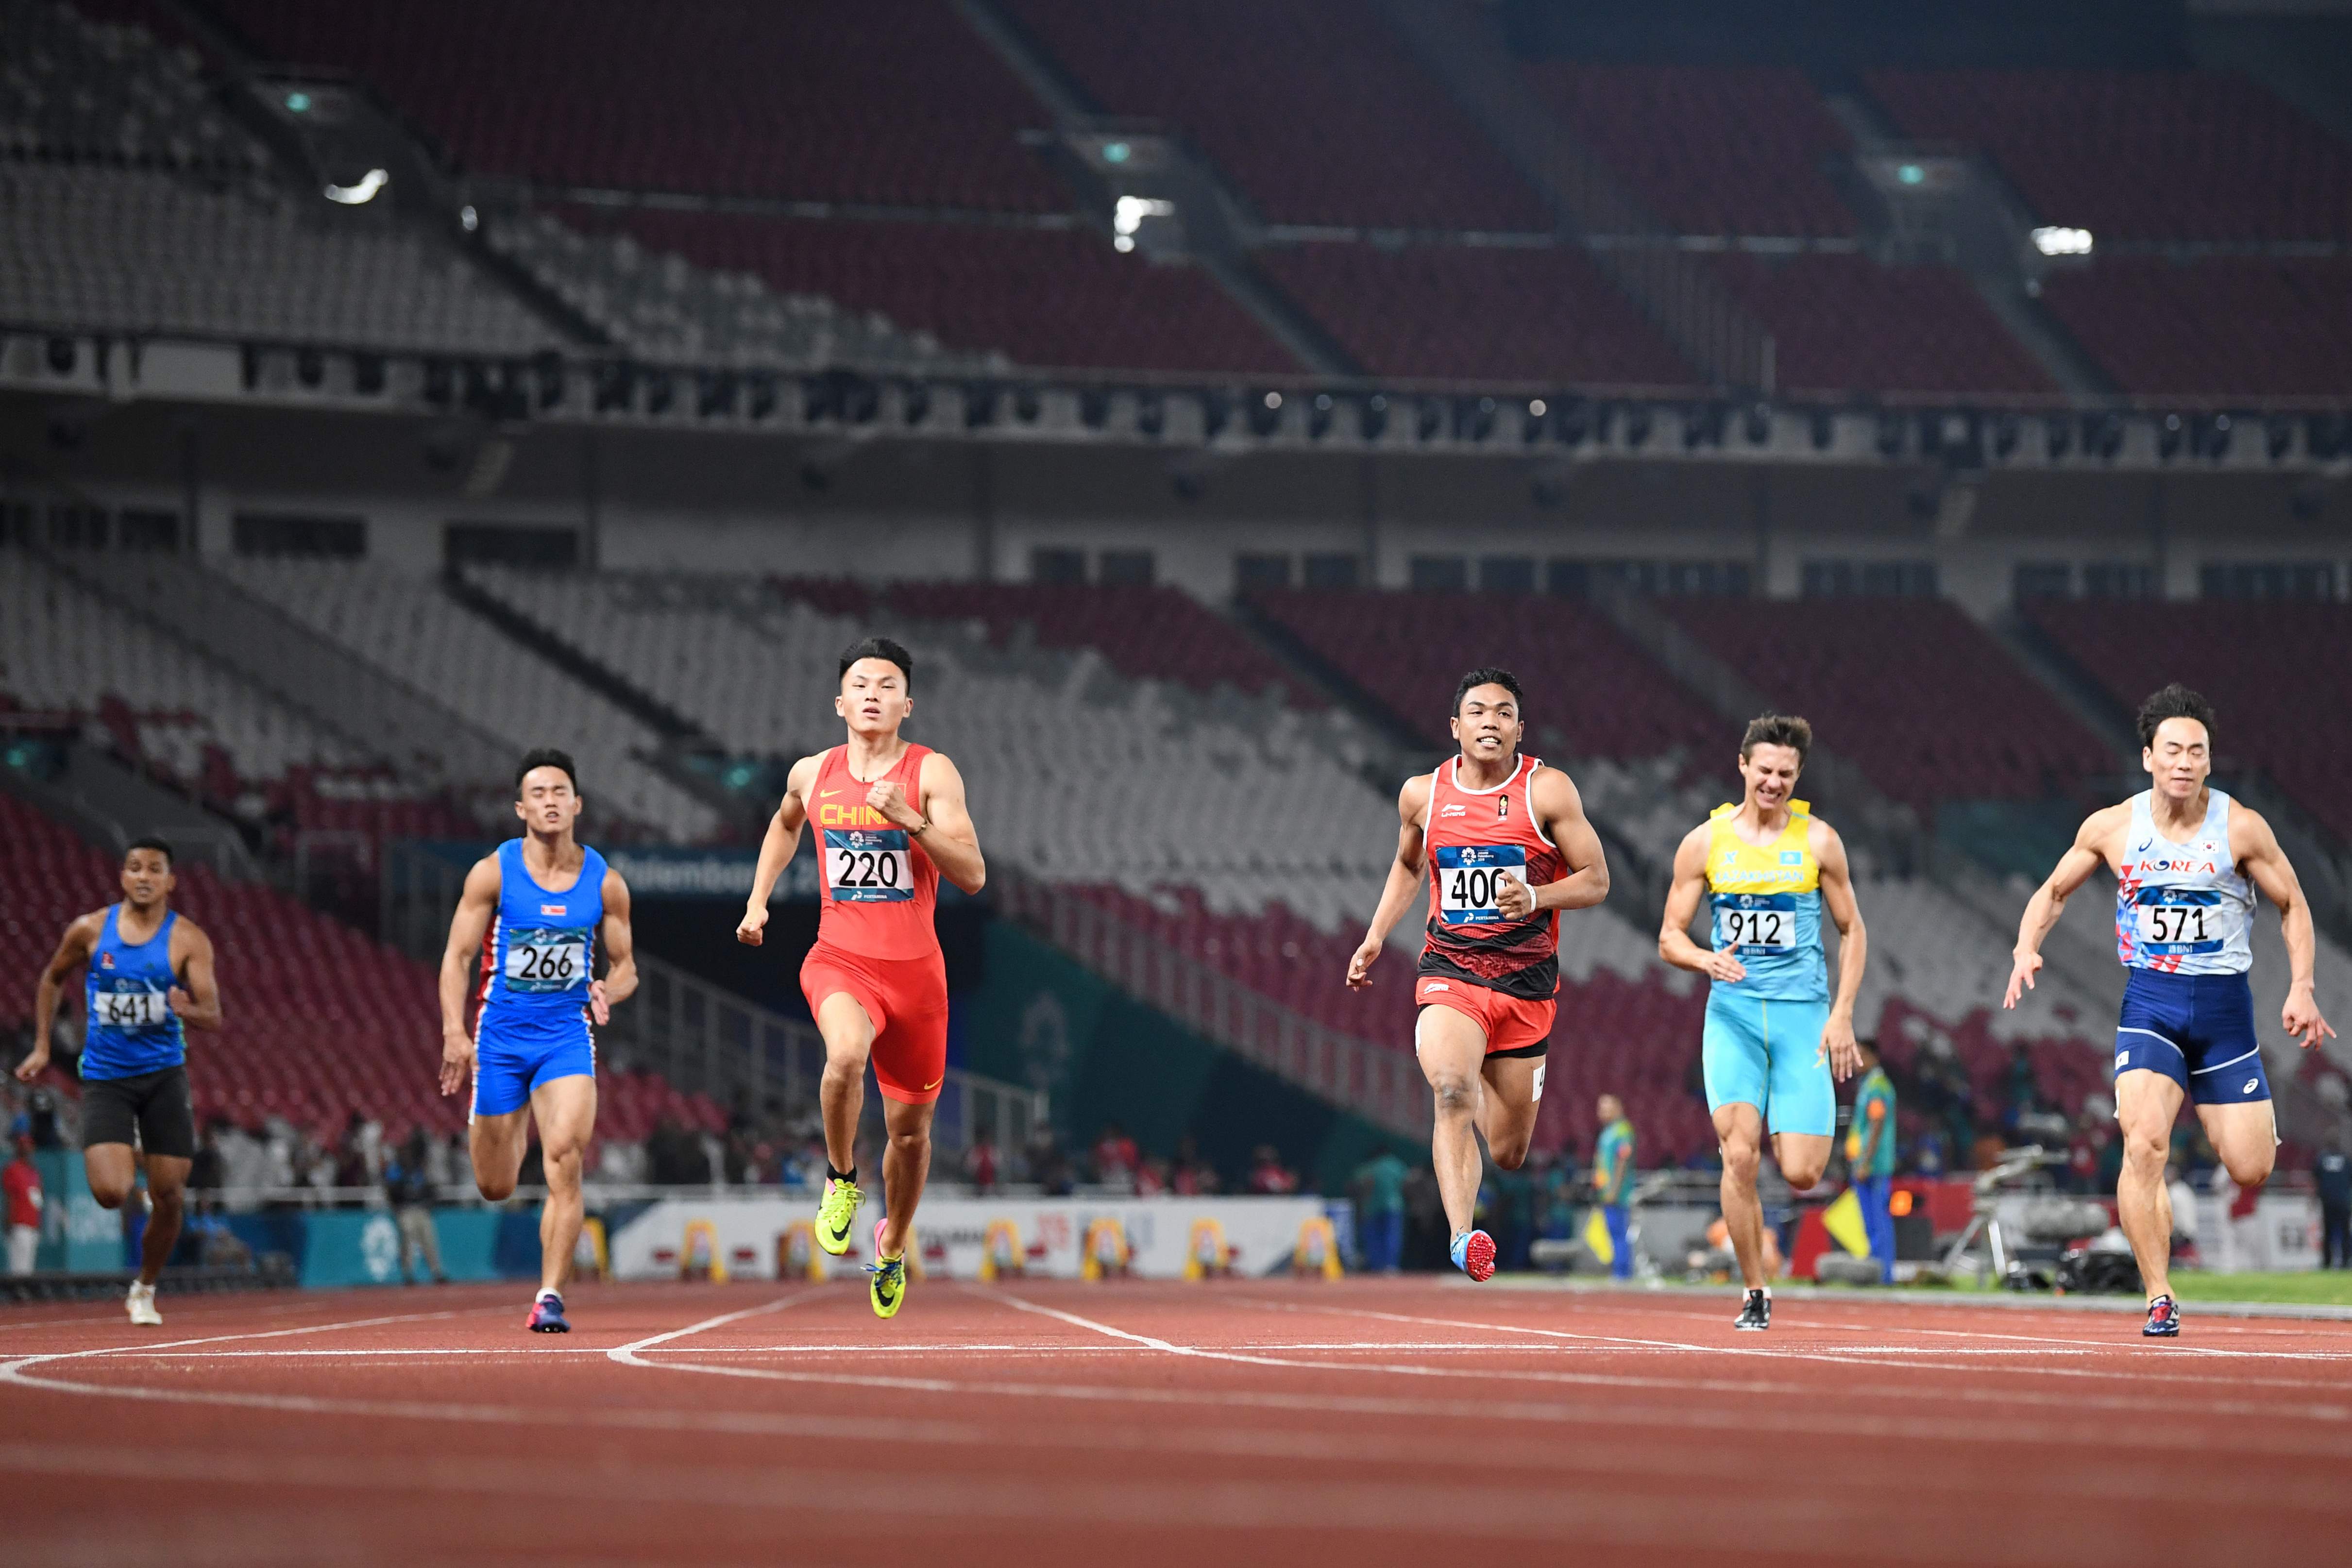 (L-R) Nepal's Sajan Sunar, North Korea's Jo Kum Ryong, China's Xu Zhouzheng, Indonesia's Lalu Muhammad Zohri, Kazakhstan's Alexandr Kasper and South Korea's Oh Kyong-soo compete in a heat of the men's 100m athletics event during the 2018 Asian Games in Jakarta on August 25, 2018. (Photo by Jewel SAMAD / AFP)